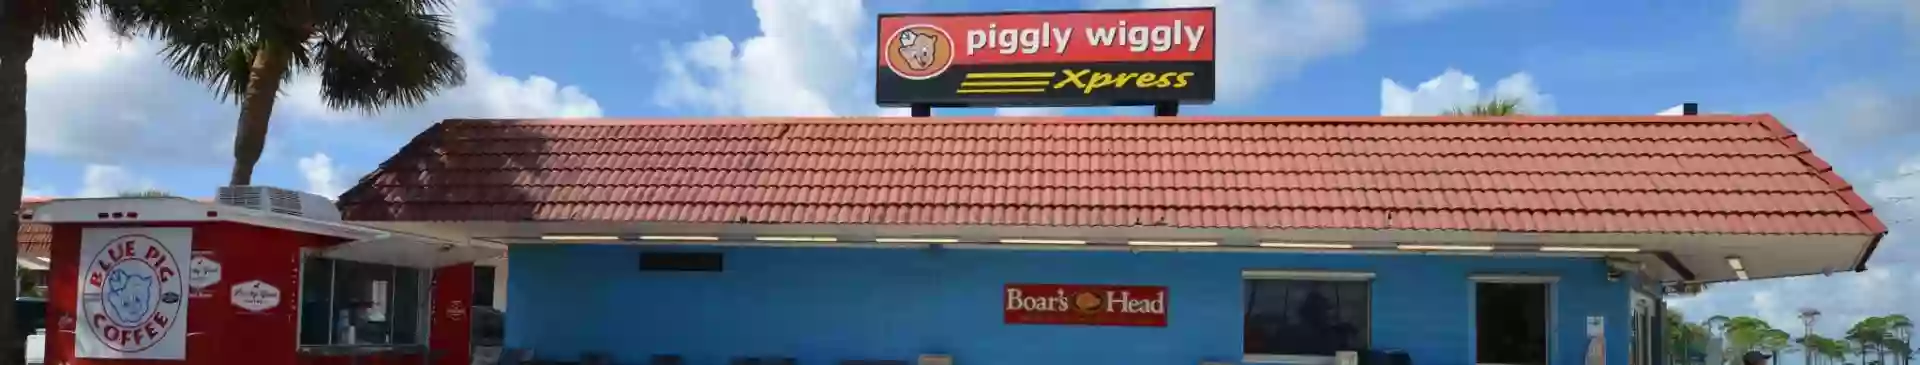 Piggly Wiggly St. George Island Grocery Store